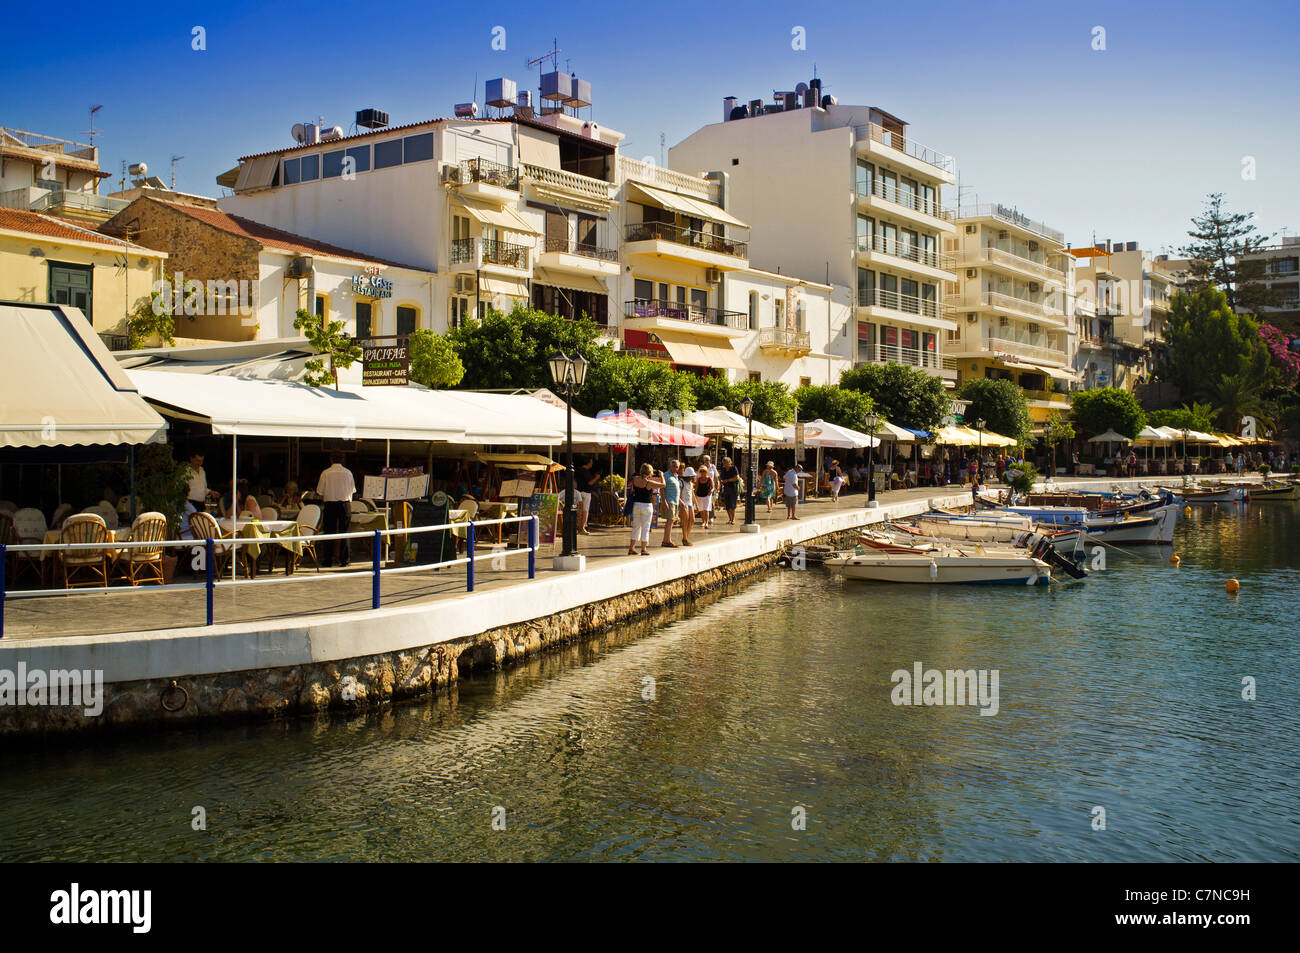 The waterfront on Lake Voulismeni in the centre of Agios Nikolaos on the Greek island of Crete bathed in late summer sunshine Stock Photo